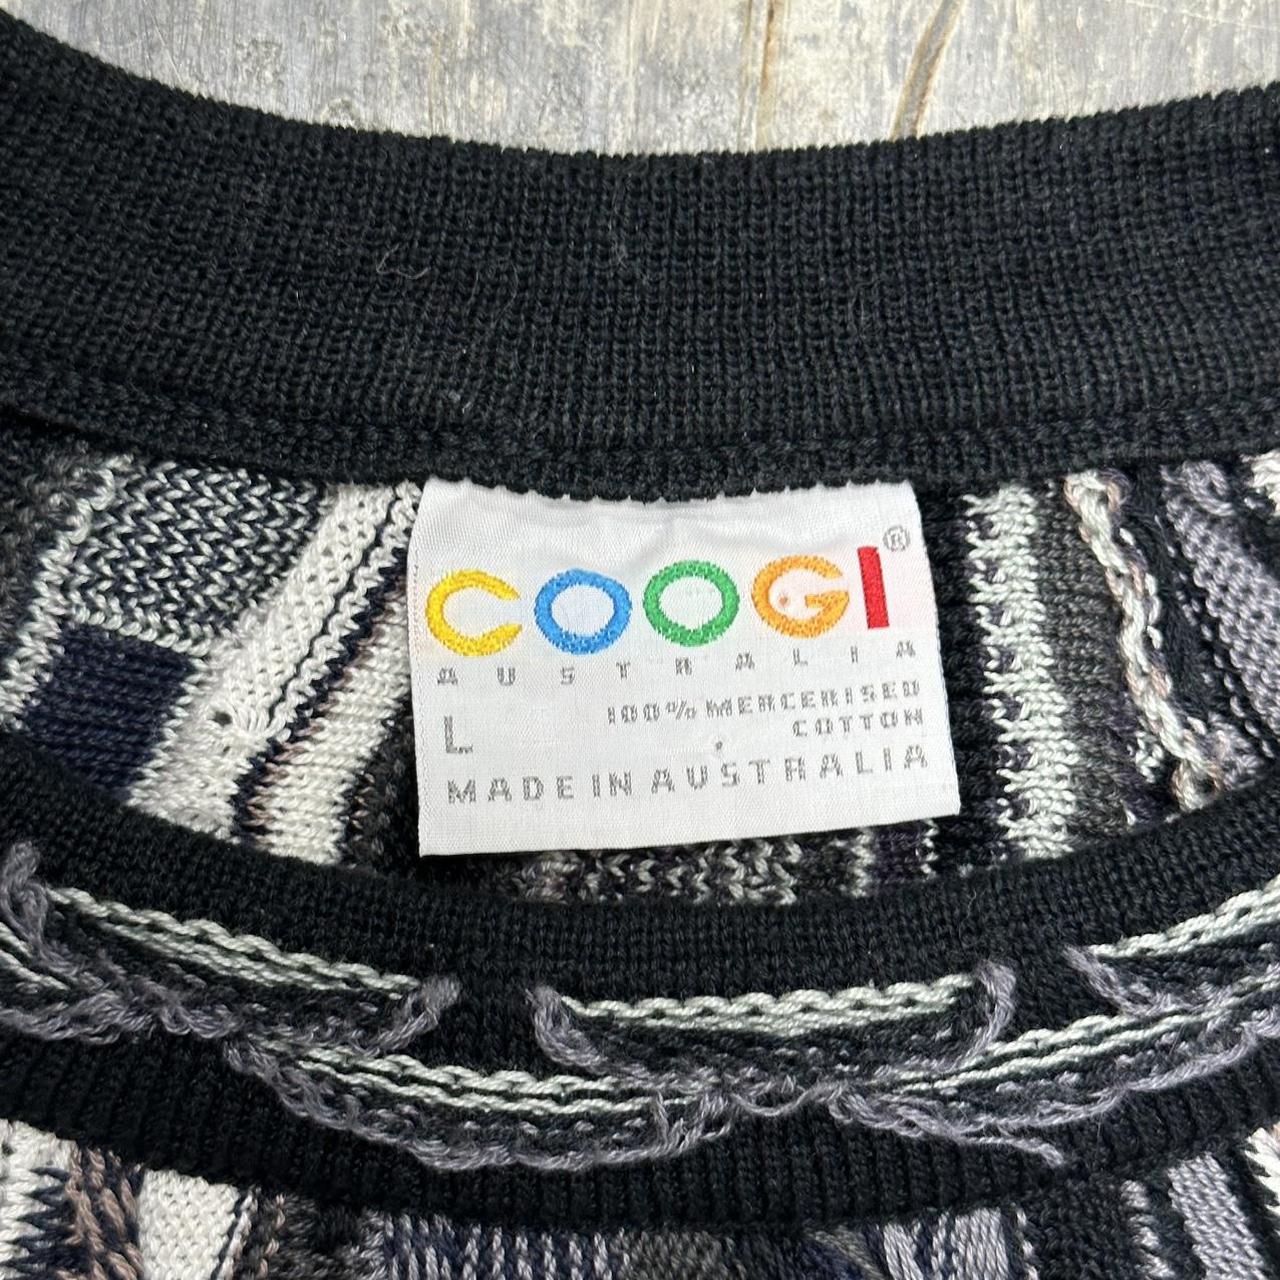 90's Sweater Co. Coogi Says it Does Not Need Authorization to